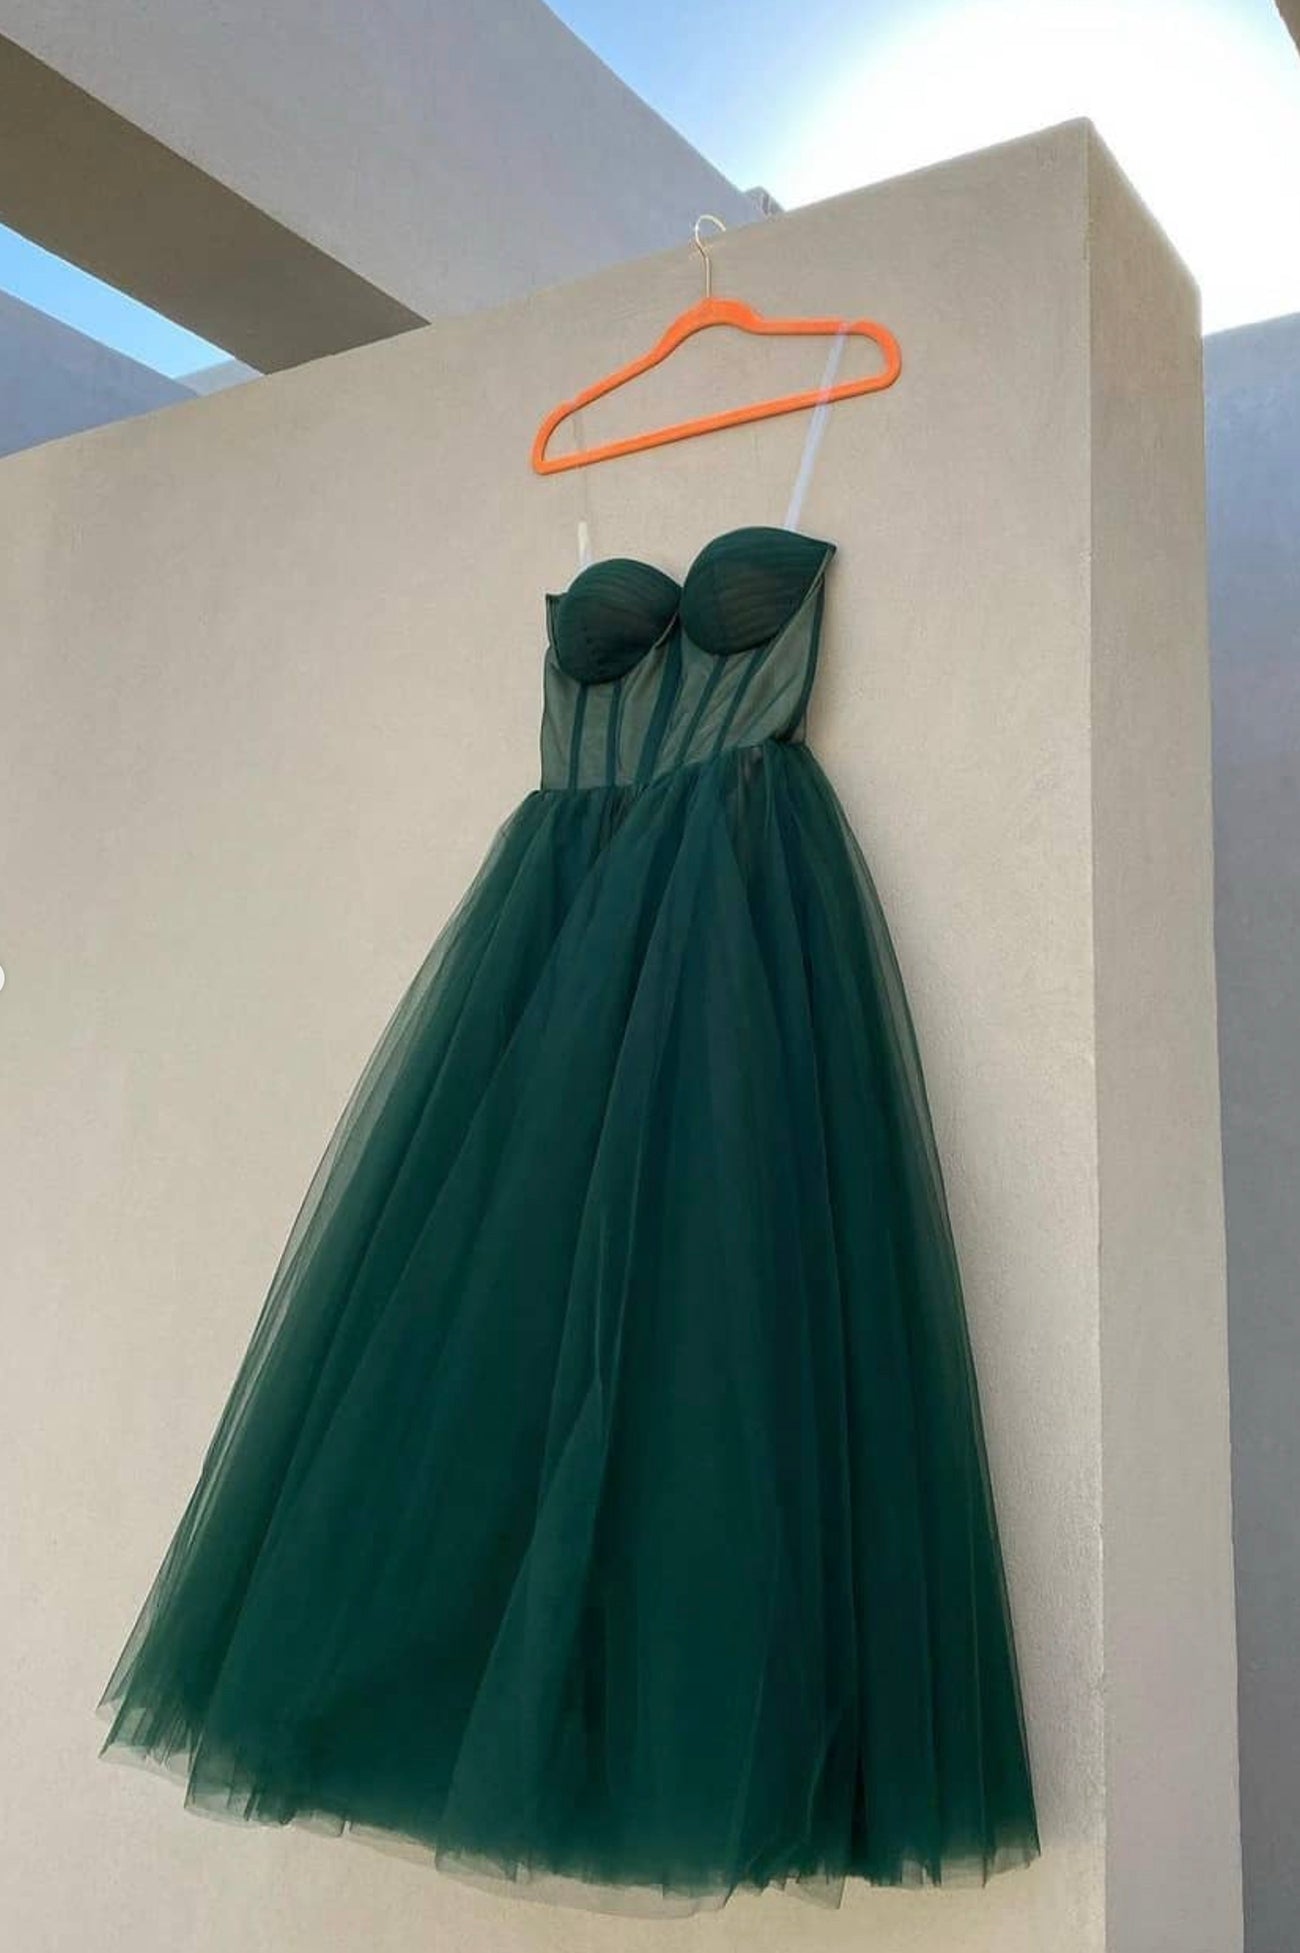 Green Tulle Short Corset Prom Dresses, Lovely Spaghetti Straps Evening Dresses outfit, Prom Dresses Photos Gallery